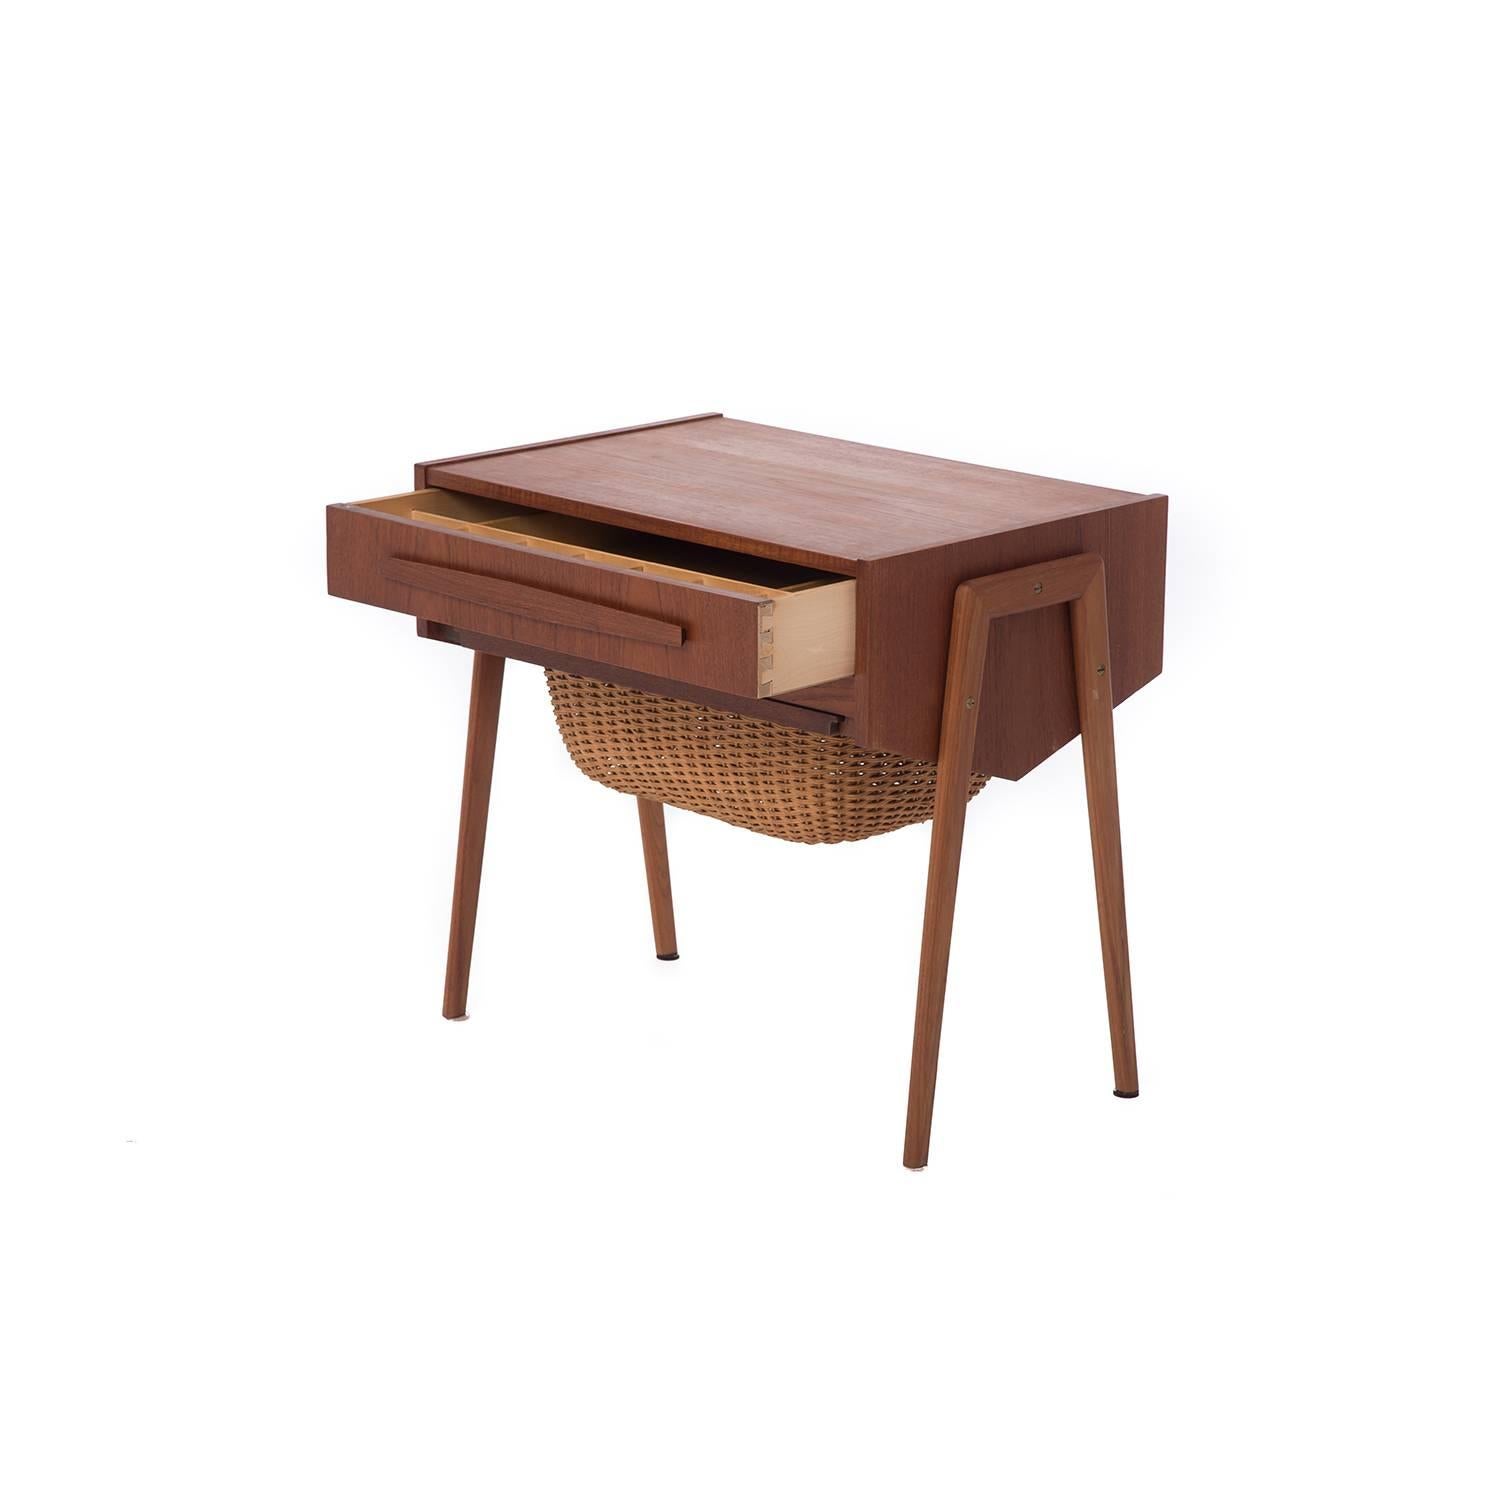 This teak sewing table feature bi-Directional sliding organizer drawer and independently sliding cane basket. Two available (think nightstands)! Sold separately.